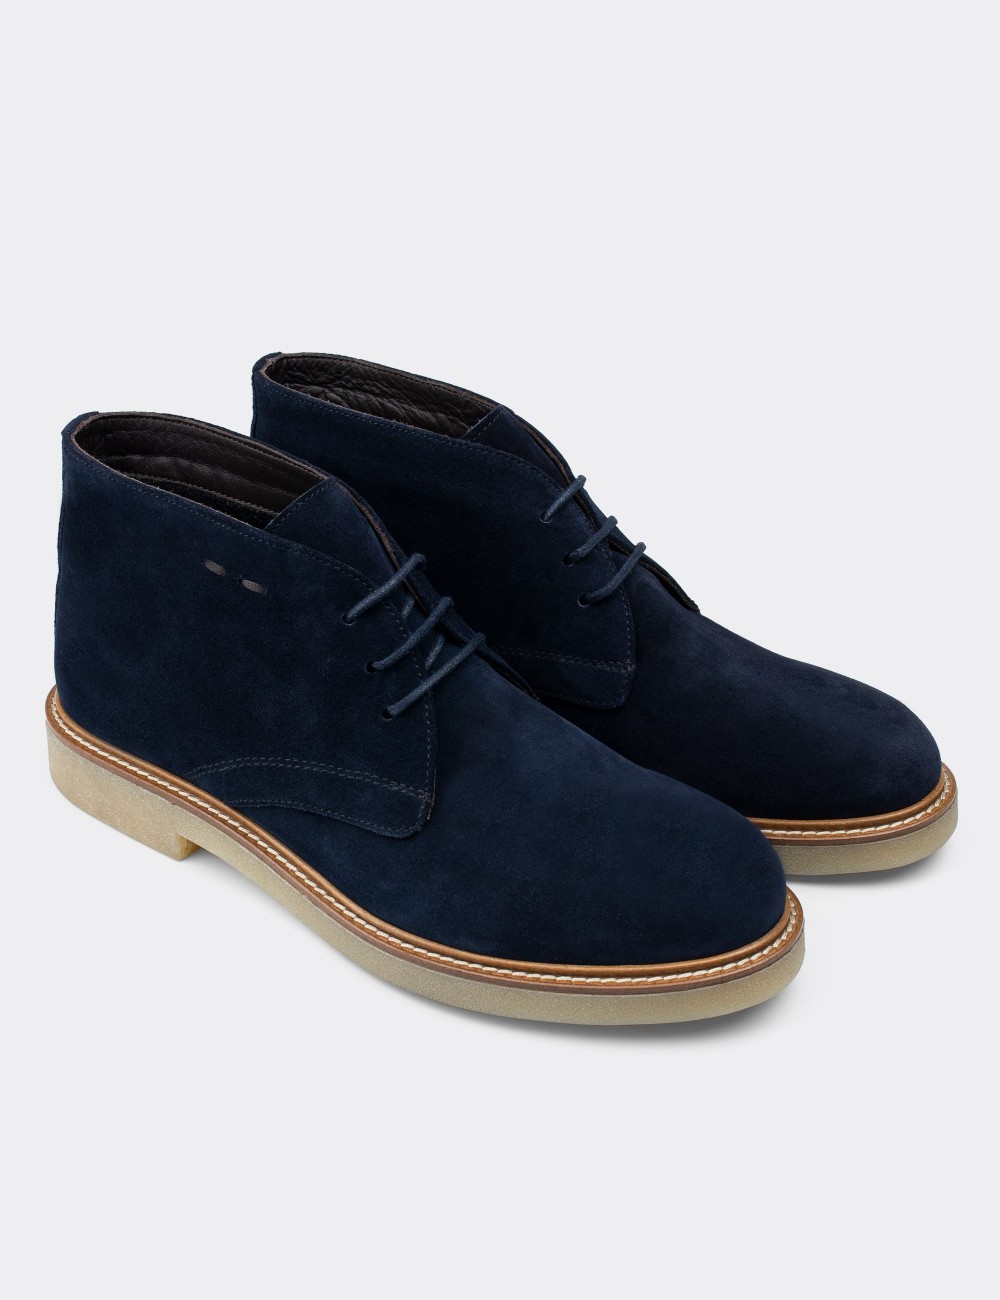 Navy Suede Leather Boots - 01295MLCVC05